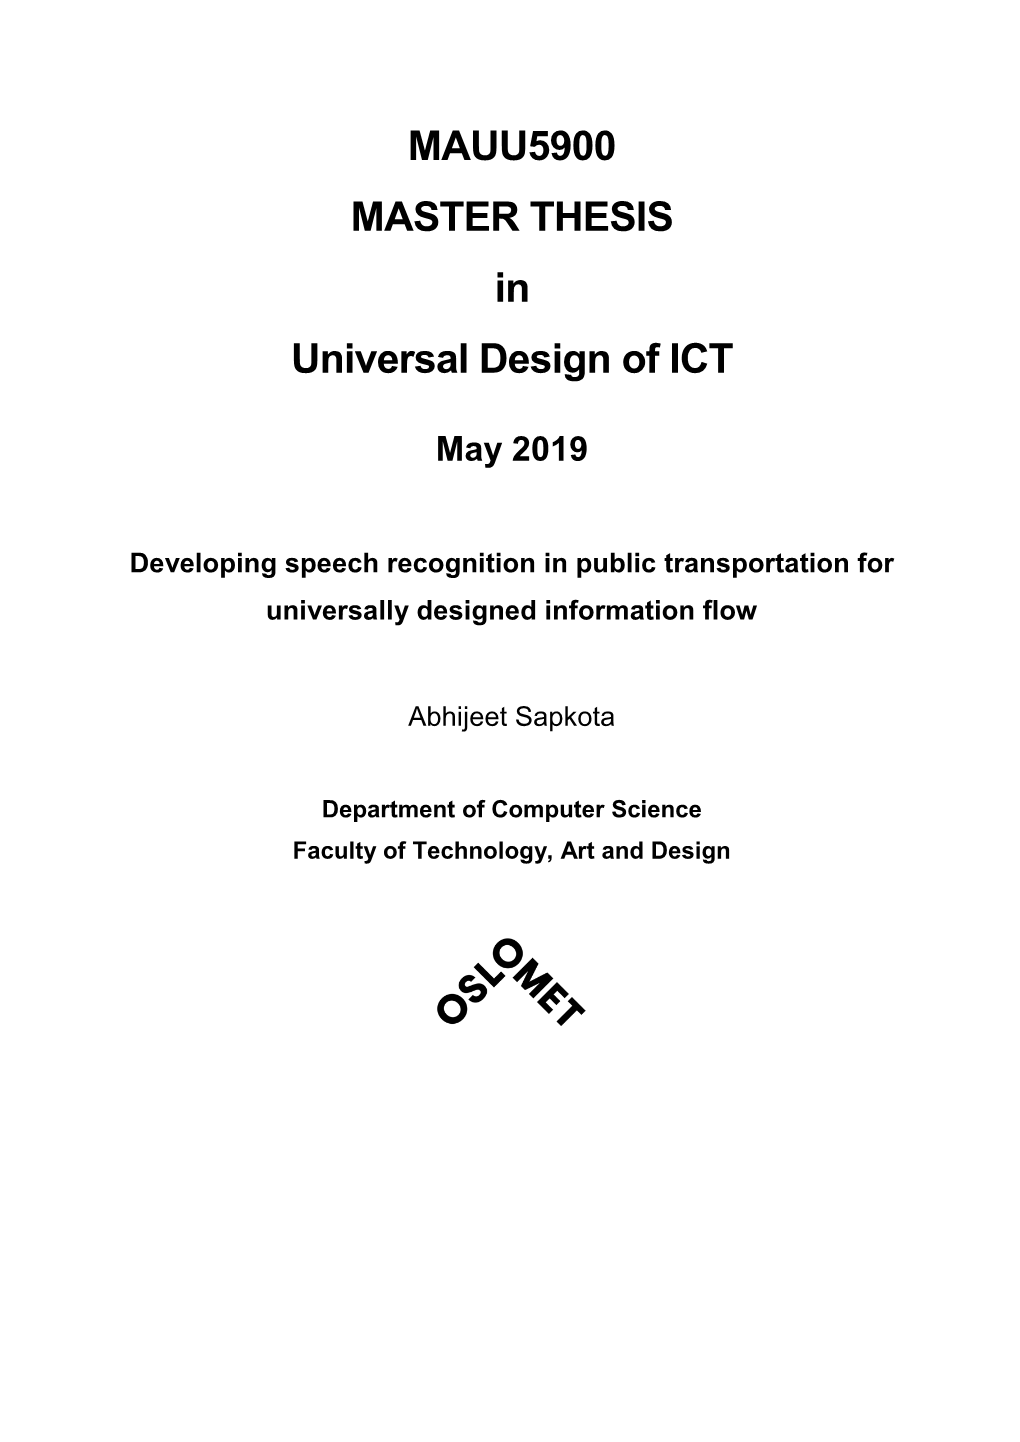 MAUU5900 MASTER THESIS in Universal Design of ICT